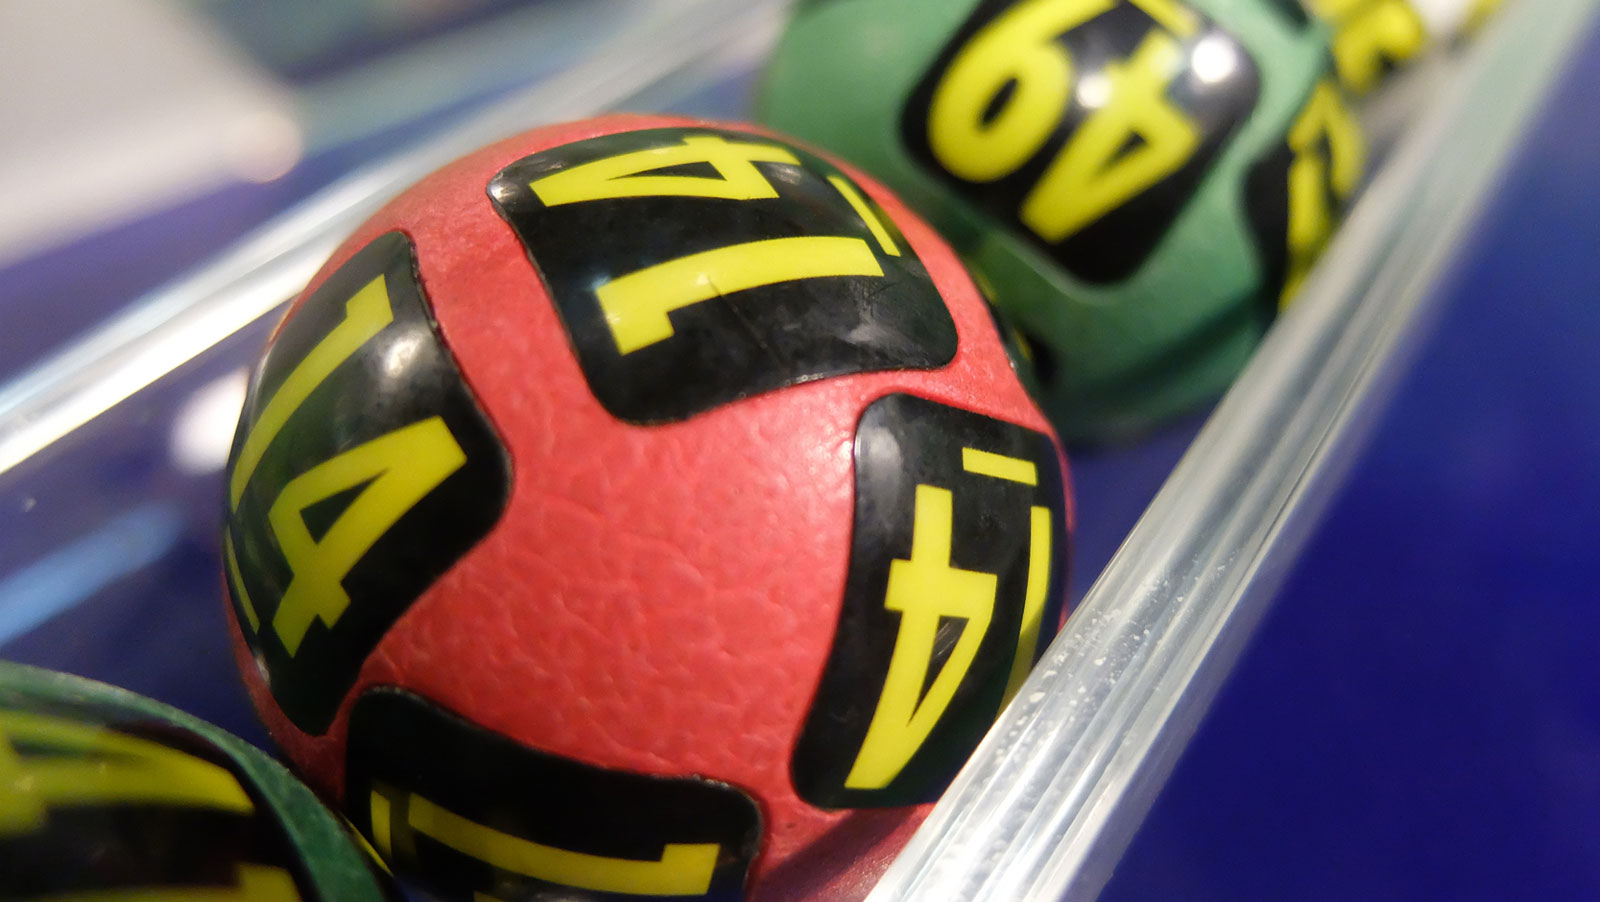 tabcorp-denies-rumors-it-will-spin-off-lottery-biz